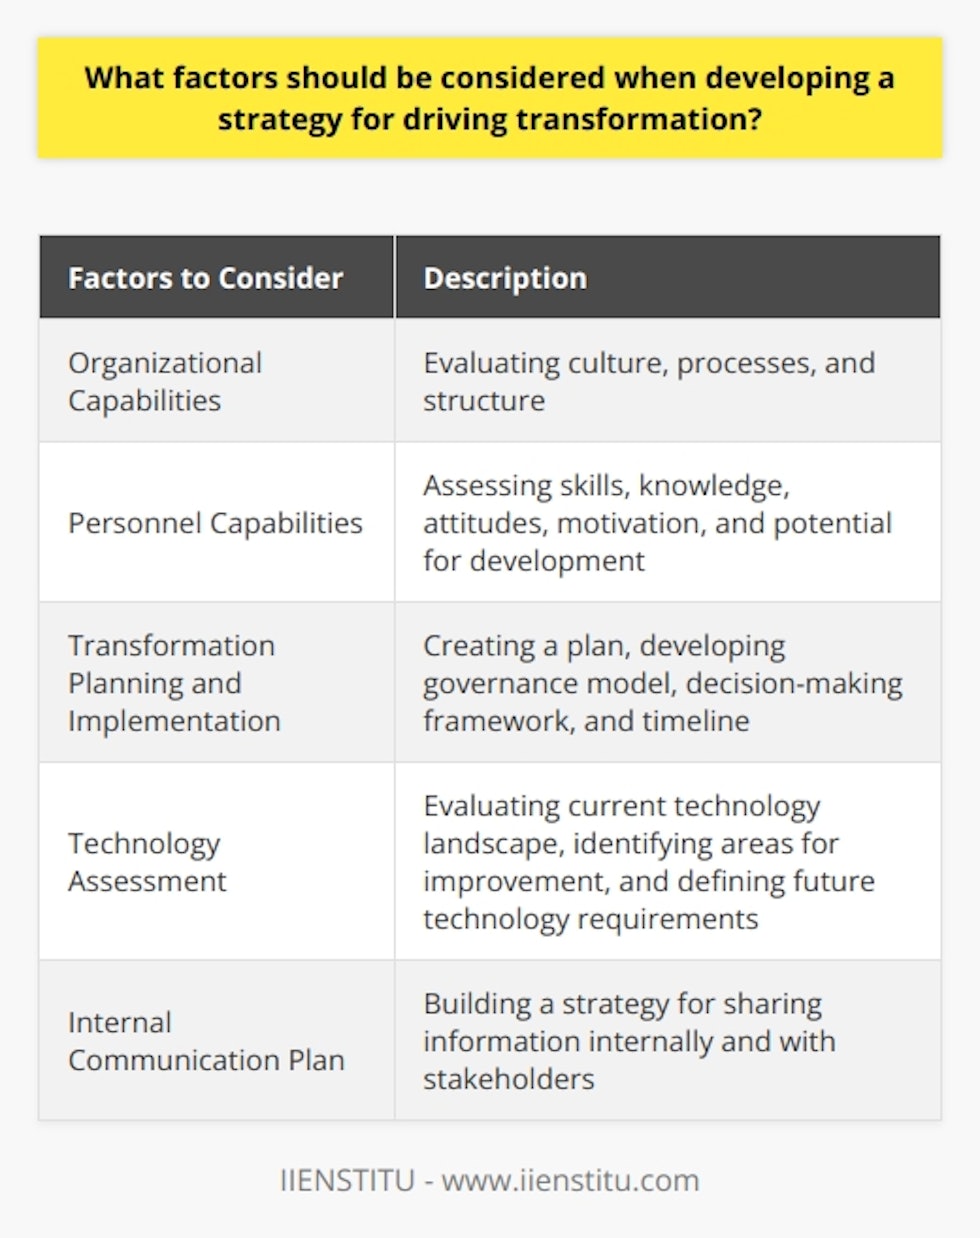 When developing a strategy for driving transformation, it is crucial to consider several factors. These factors include understanding the current organizational and individual capabilities, planning and implementing the transformation strategy, assessing the impact of technology, and developing an internal communication plan.First and foremost, organizations must assess their capabilities. This involves understanding what resources, such as finances, technology, and staff, are available for executing the transformation. It also involves evaluating the organizational capabilities, such as culture, processes, and structure. These capabilities will determine which change initiatives need to be undertaken and how they should be executed.It is also important to assess the capabilities of the personnel involved in the transformation. This includes assessing their skills, knowledge, and attitudes. Understanding the capabilities of the personnel will help in allocating resources and identifying any gaps in knowledge or equipment. This information can then be used to develop strategies for filling those gaps. Additionally, personnel evaluations should consider employee motivation, engagement, and potential for development.Once the capabilities assessment is complete, organizations should proceed with planning and implementing the transformation strategy. This involves creating a plan that outlines the steps, activities, and procedures necessary for achieving the desired outcomes. It is also important to develop a governance model, decision-making framework, and timeline for executing each transformation initiative.A technology assessment should also be included in the transformation strategy. This involves assessing the organization's current technology landscape, identifying areas for improvement, and defining requirements for future technology. Organizations should also consider the capabilities of their existing tech stack and the implications of new technologies on their transformation strategy.Lastly, organizations must develop an internal communications plan to ensure that all stakeholders are involved in the transformation journey. This includes building a communications strategy that outlines how information will be shared internally, with customers, and with other stakeholders. Effective communication is crucial for maintaining trust and commitment to the transformation initiatives.In conclusion, organizations should consider the organizational and individual capabilities, plan for the transformation strategy, assess the impact of technology, and develop an internal communication plan when developing a strategy for driving transformation. By considering these factors, organizations can position themselves for successful execution of their transformation initiatives.